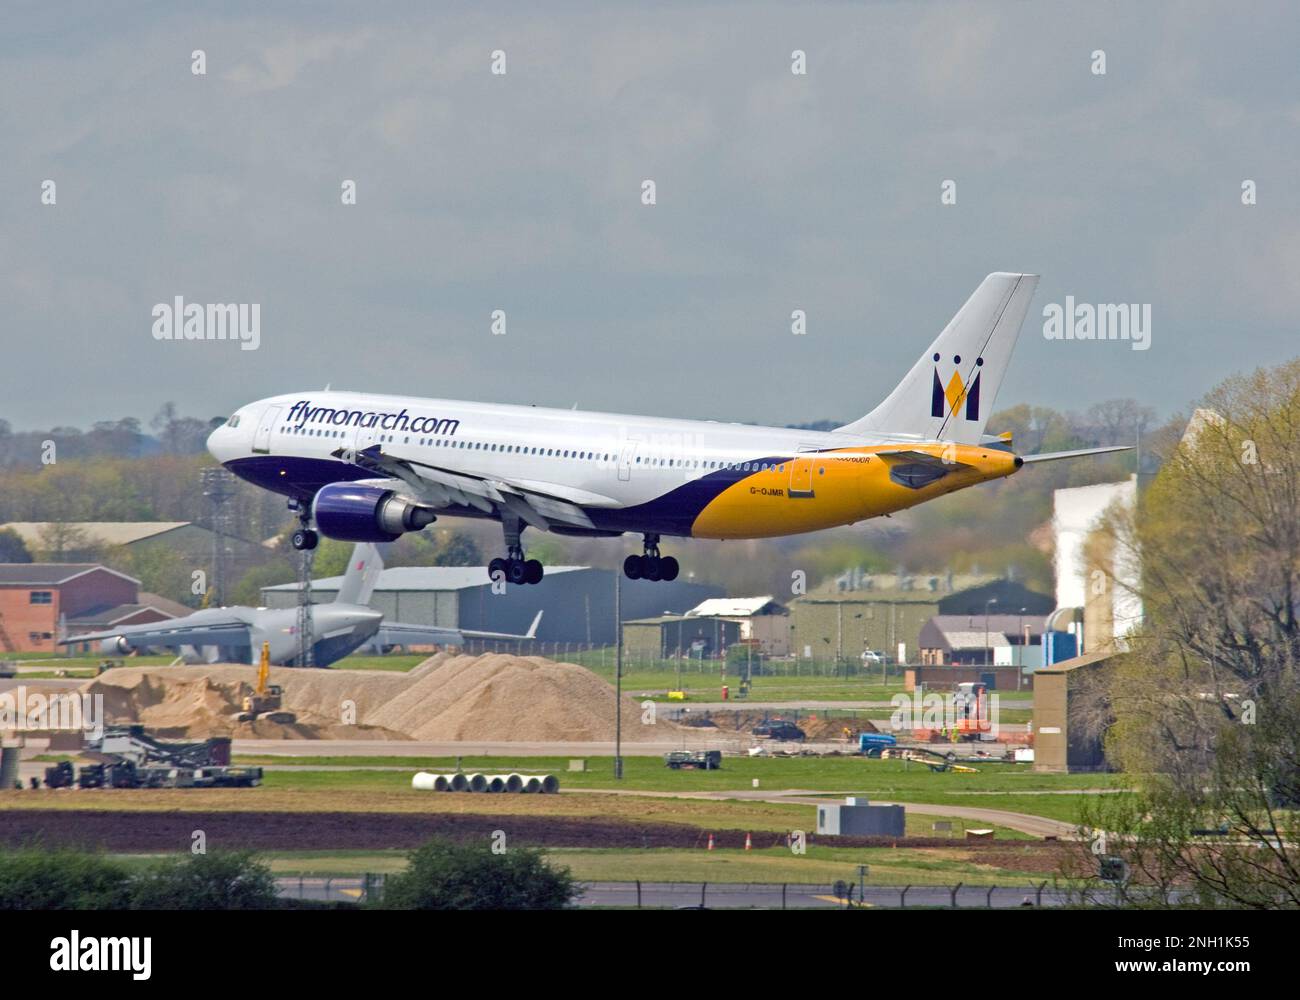 G-OJMR Monarch Airlines Airbus A300-605R landing at RAF Brize Norton. 23rd April 2008. Stock Photo